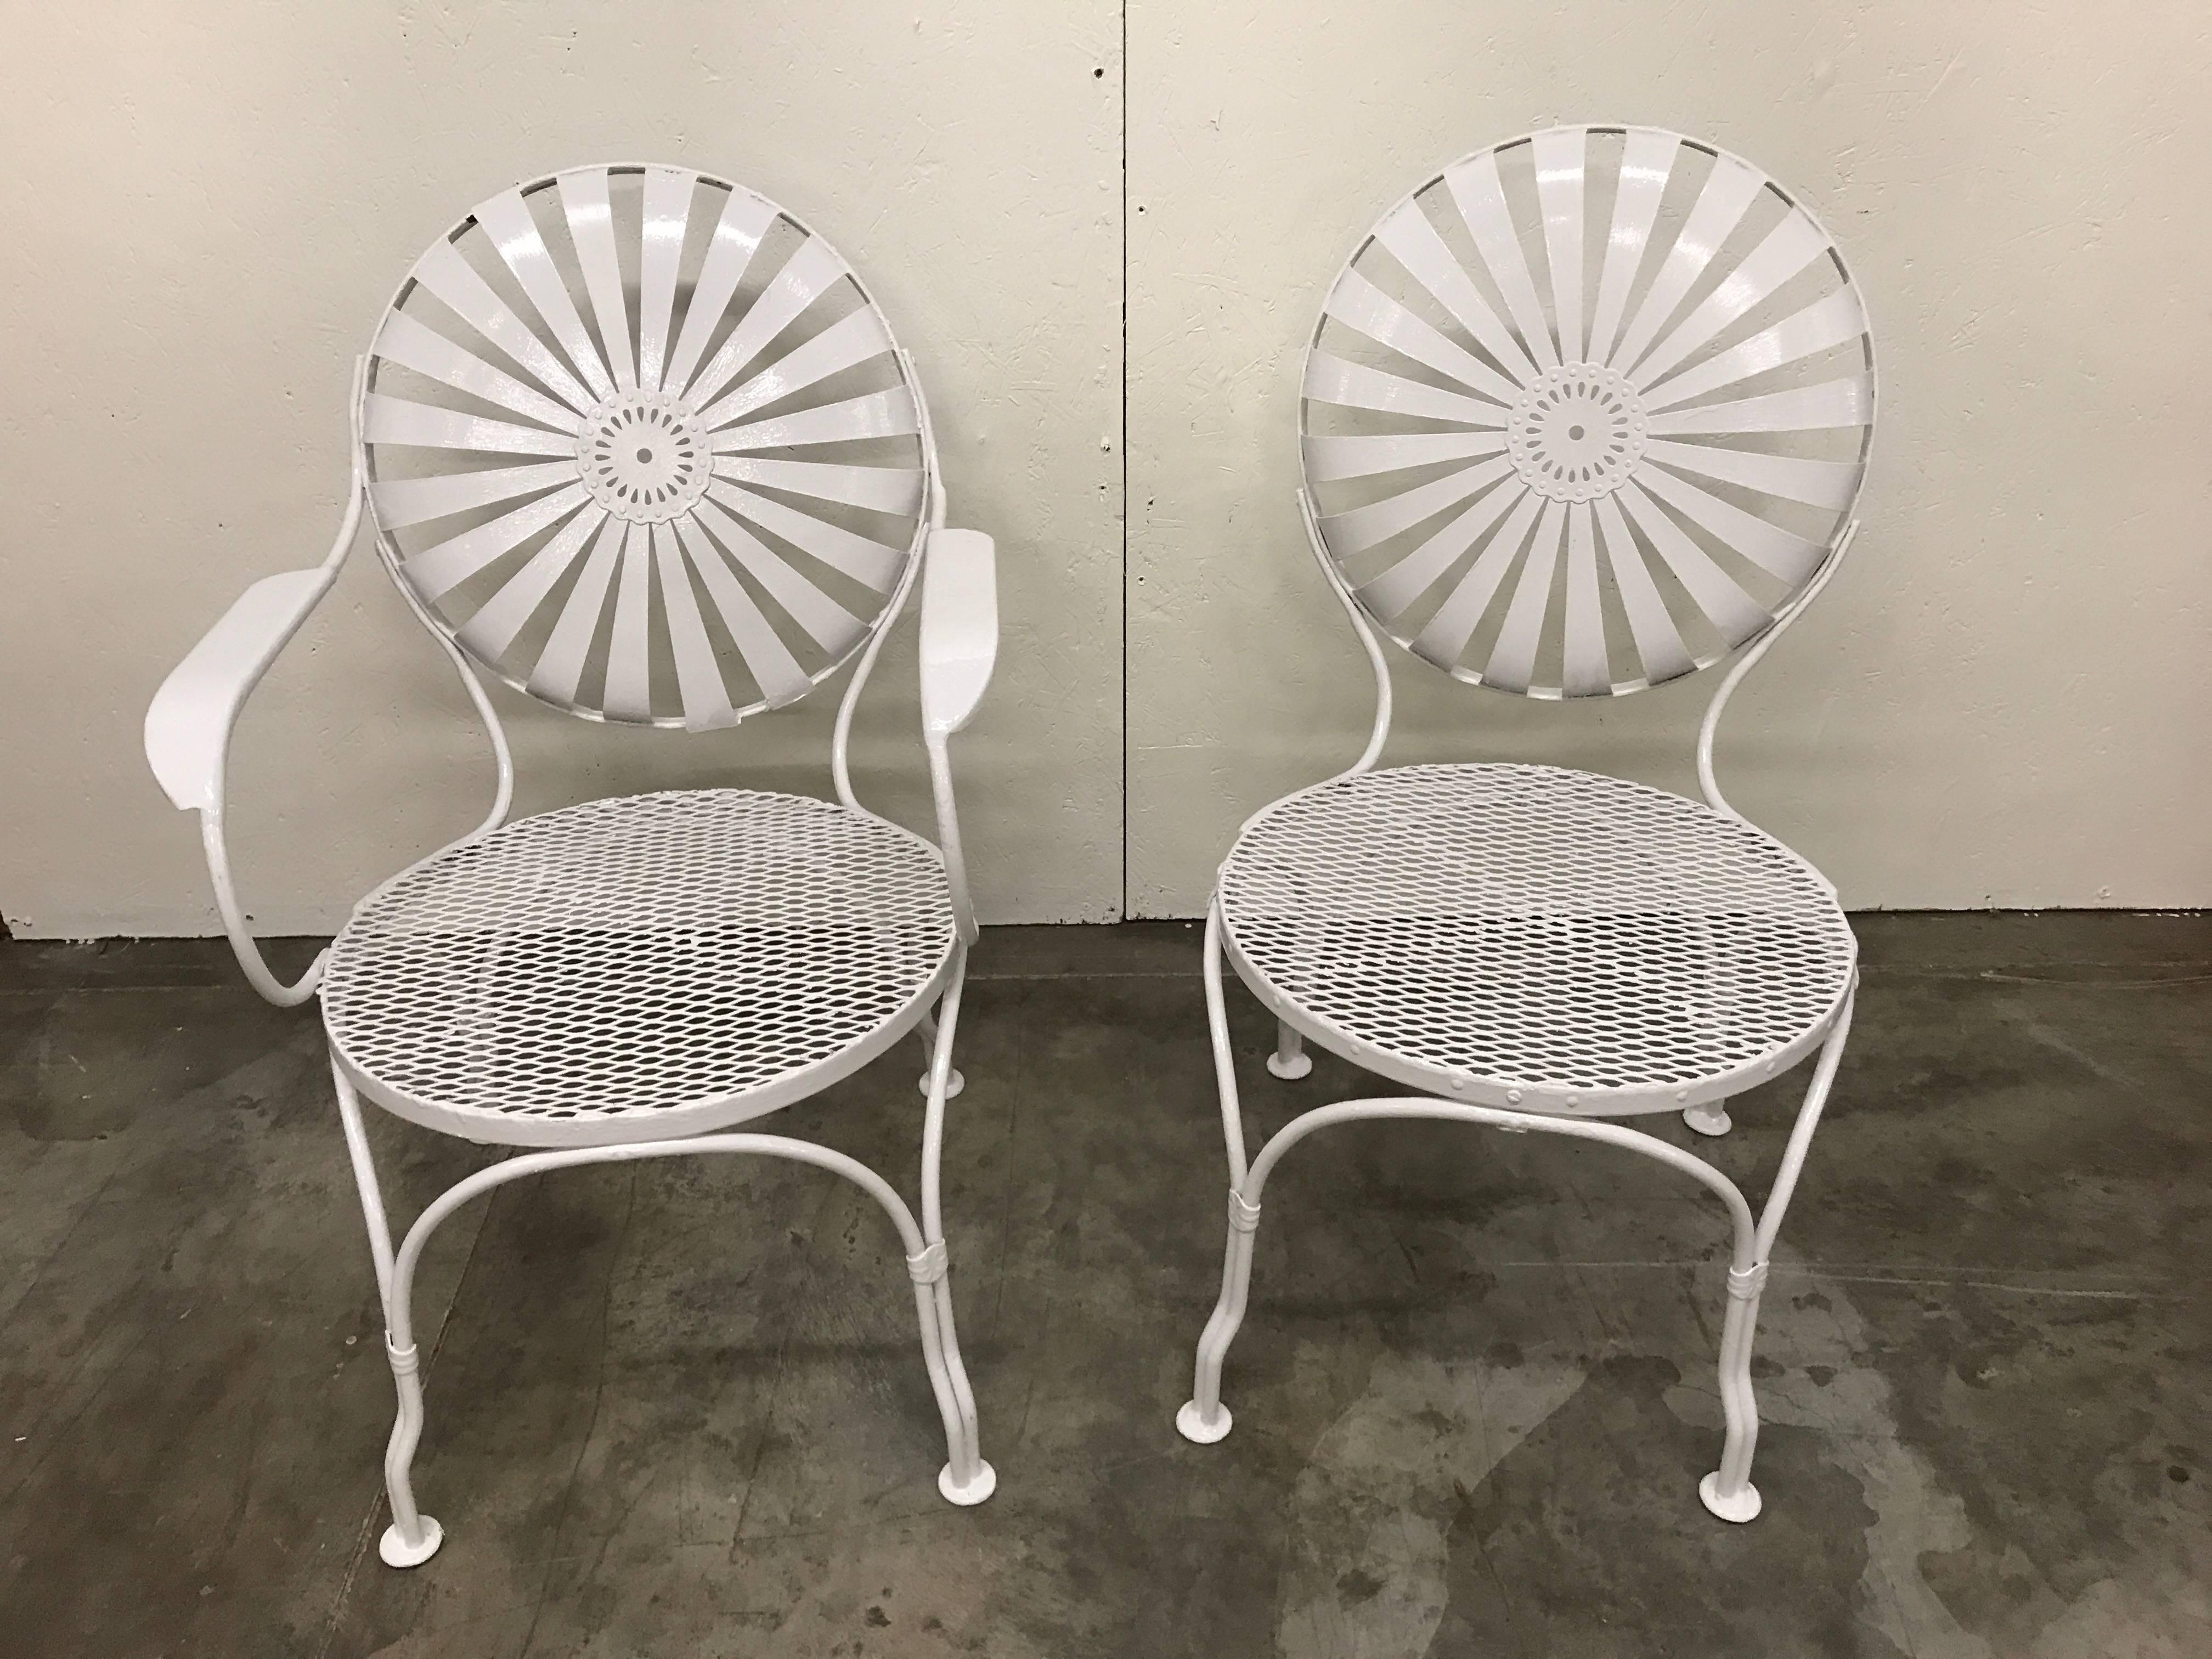 Set of six sunburst back chairs, by Francois Carre, consisting of one armchair and five side chairs with varying seat back measure: heights of 31